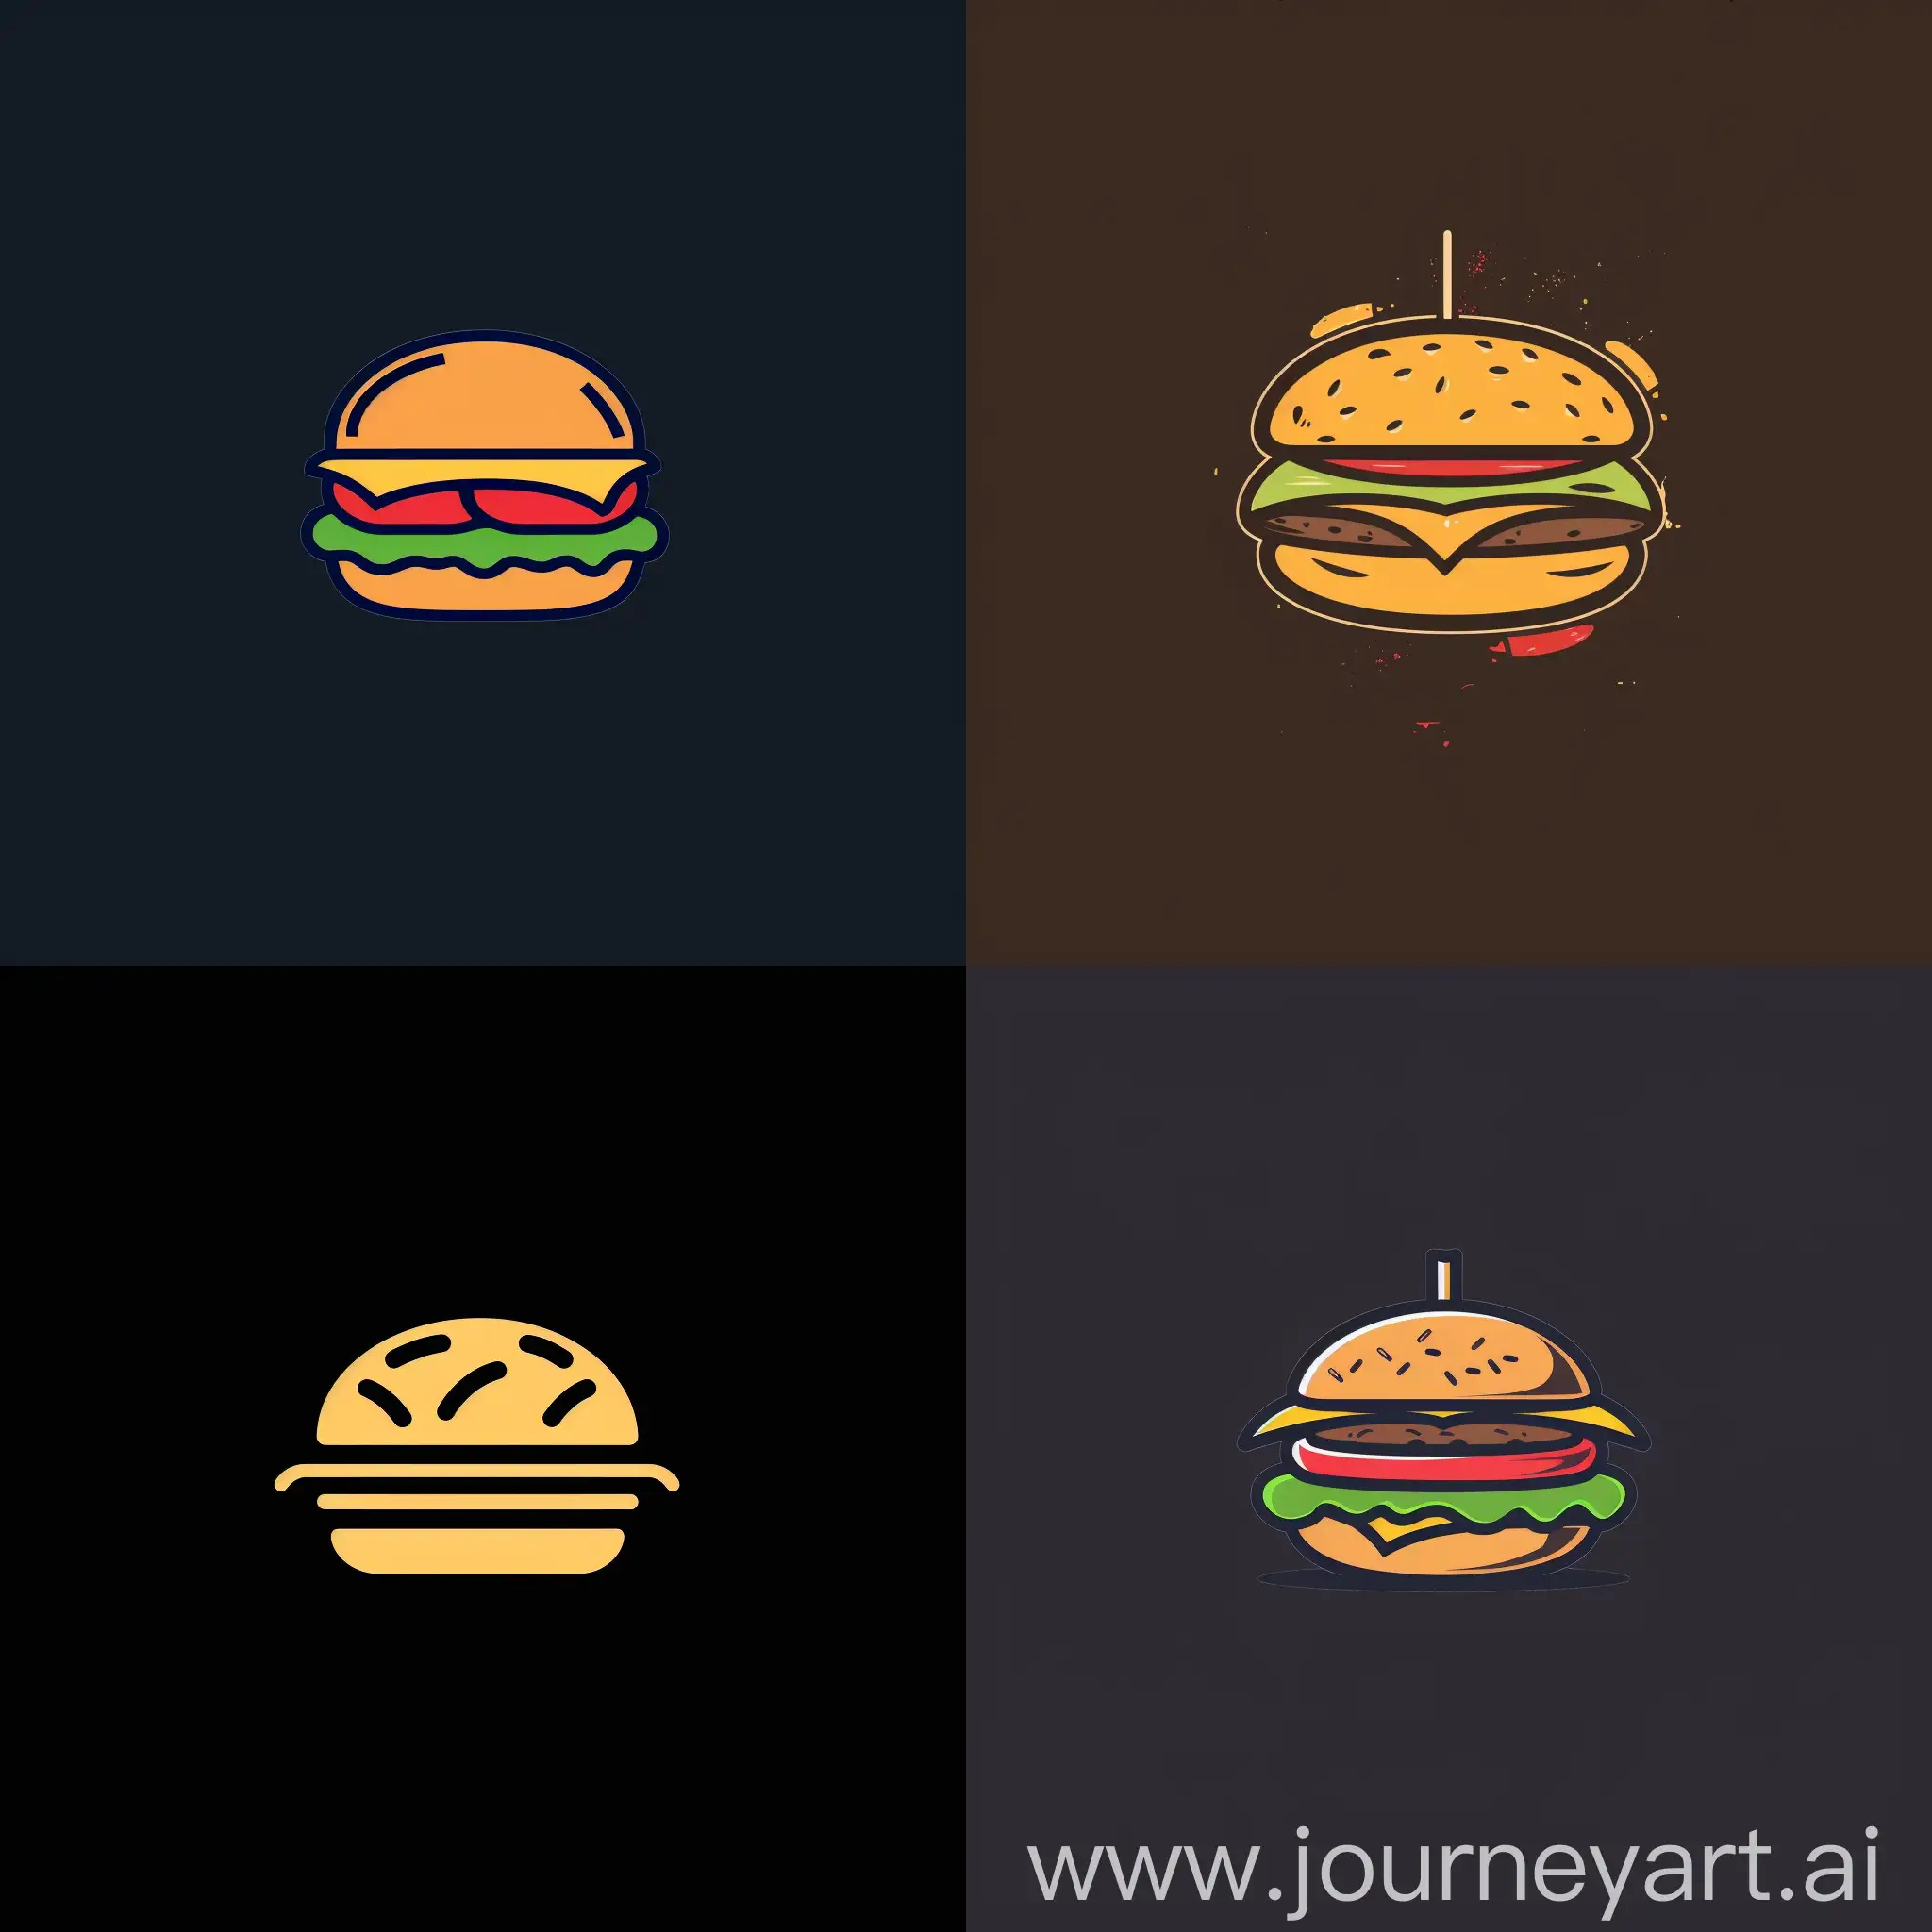 Minimalist-Burger-Logo-Design-with-Clean-Lines-and-Balanced-Composition